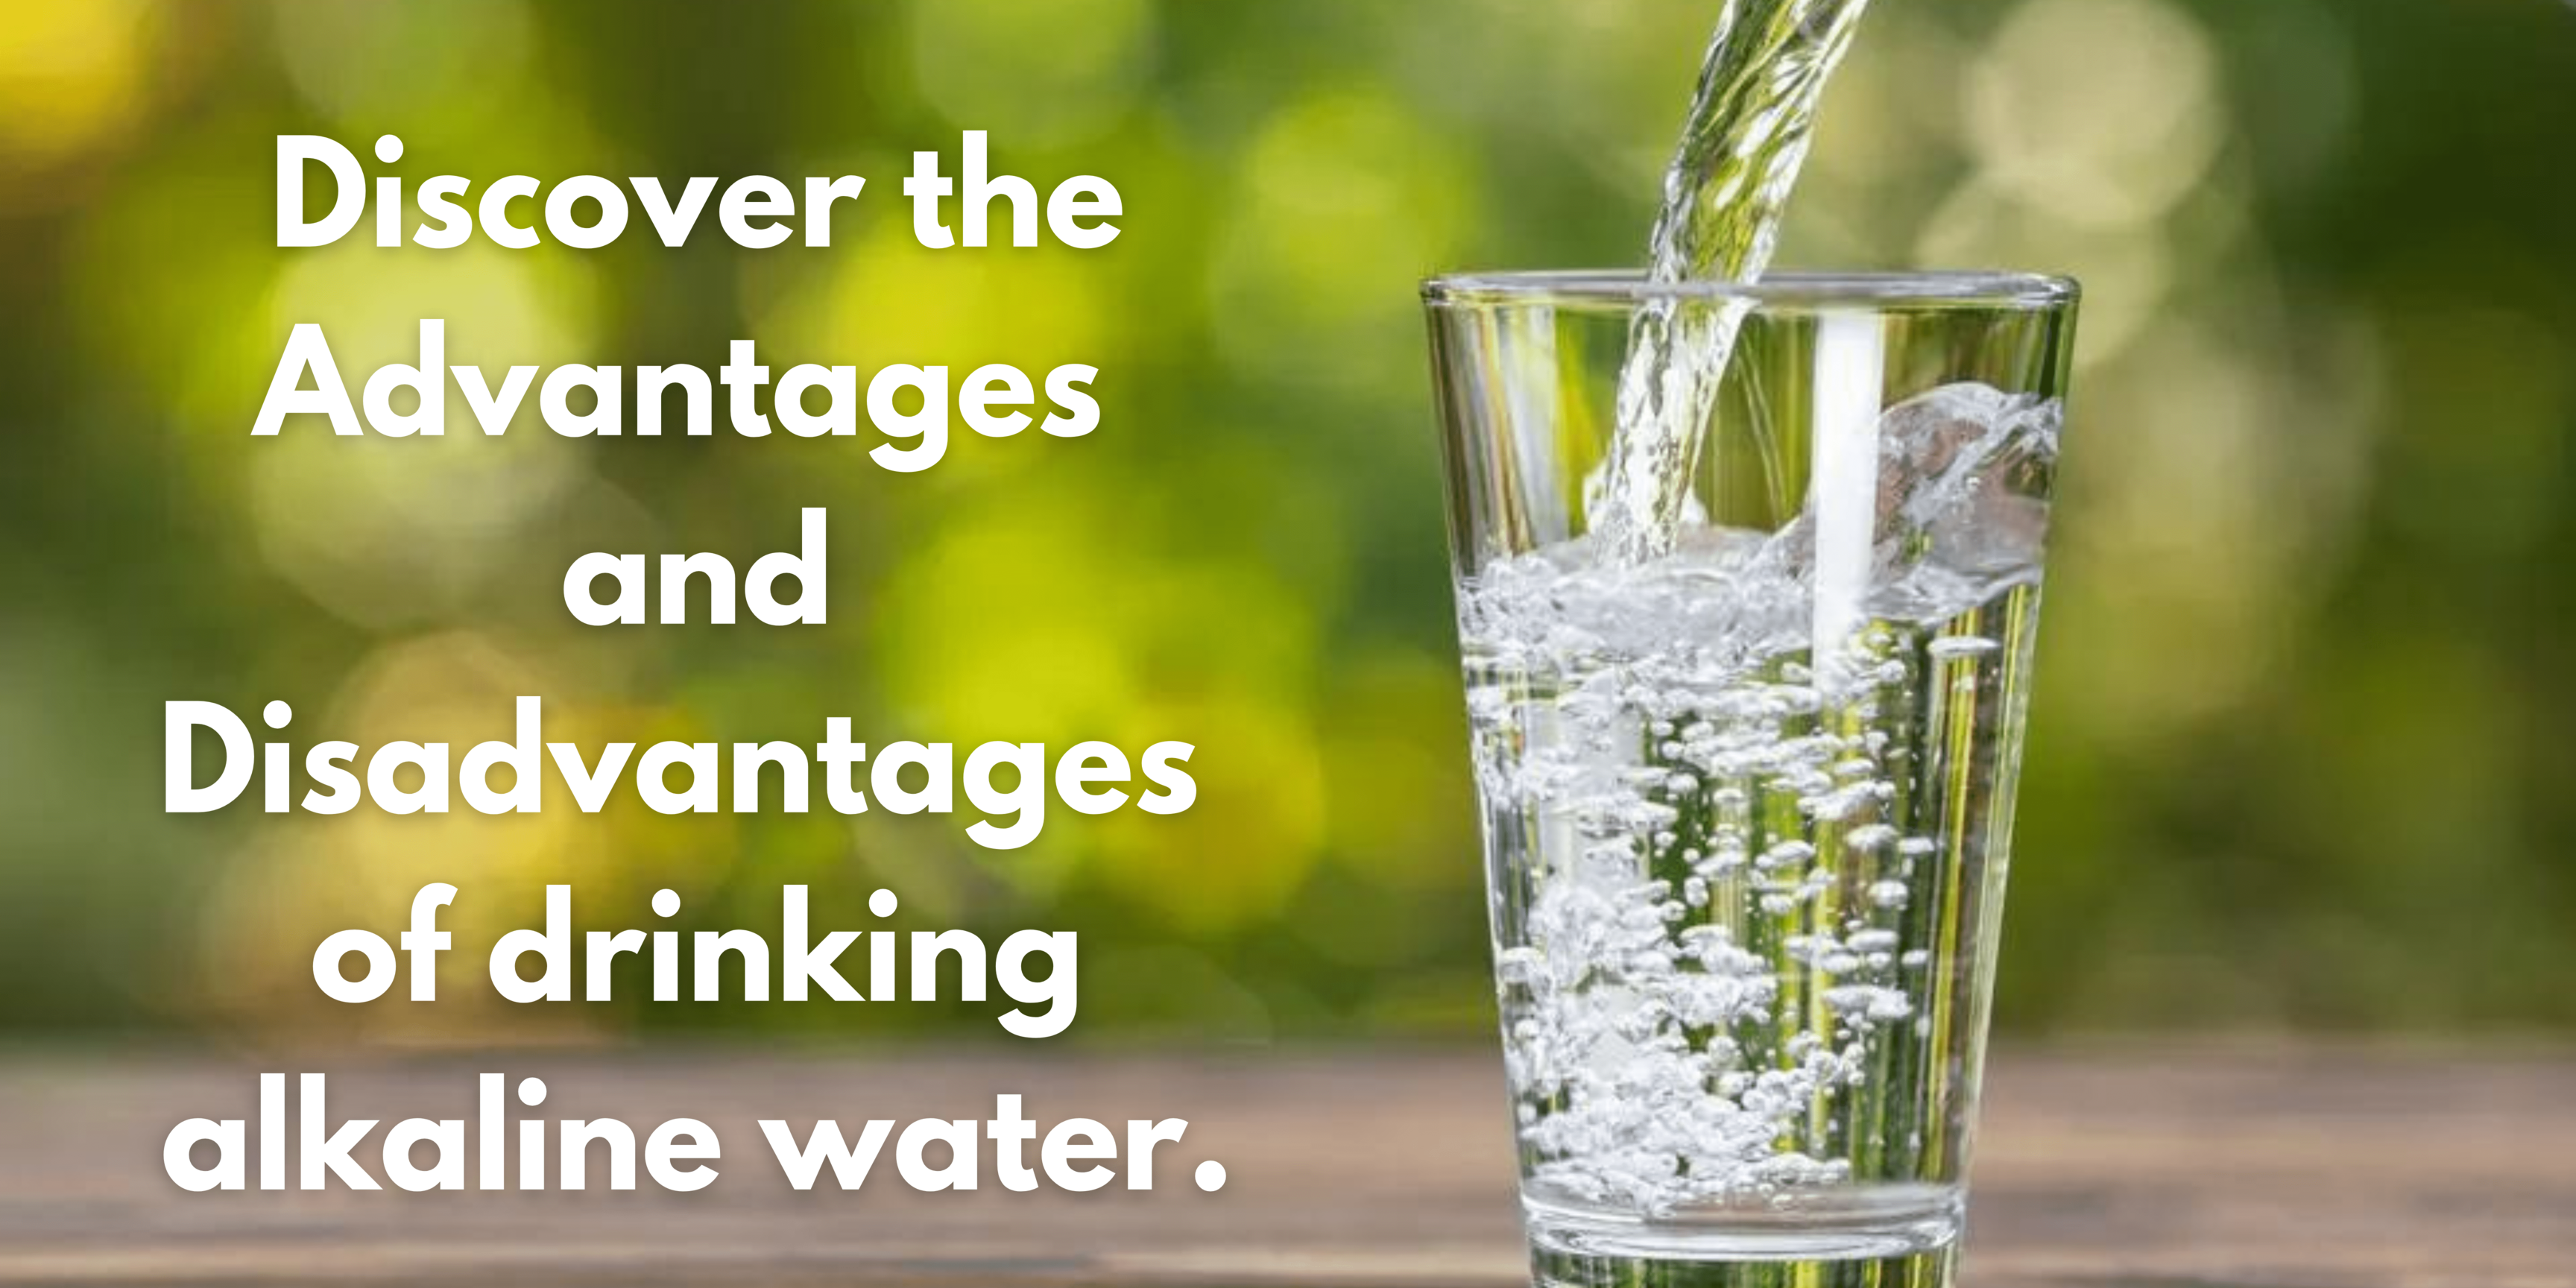 Discover the Advantages and Disadvantages of drinking alkaline water